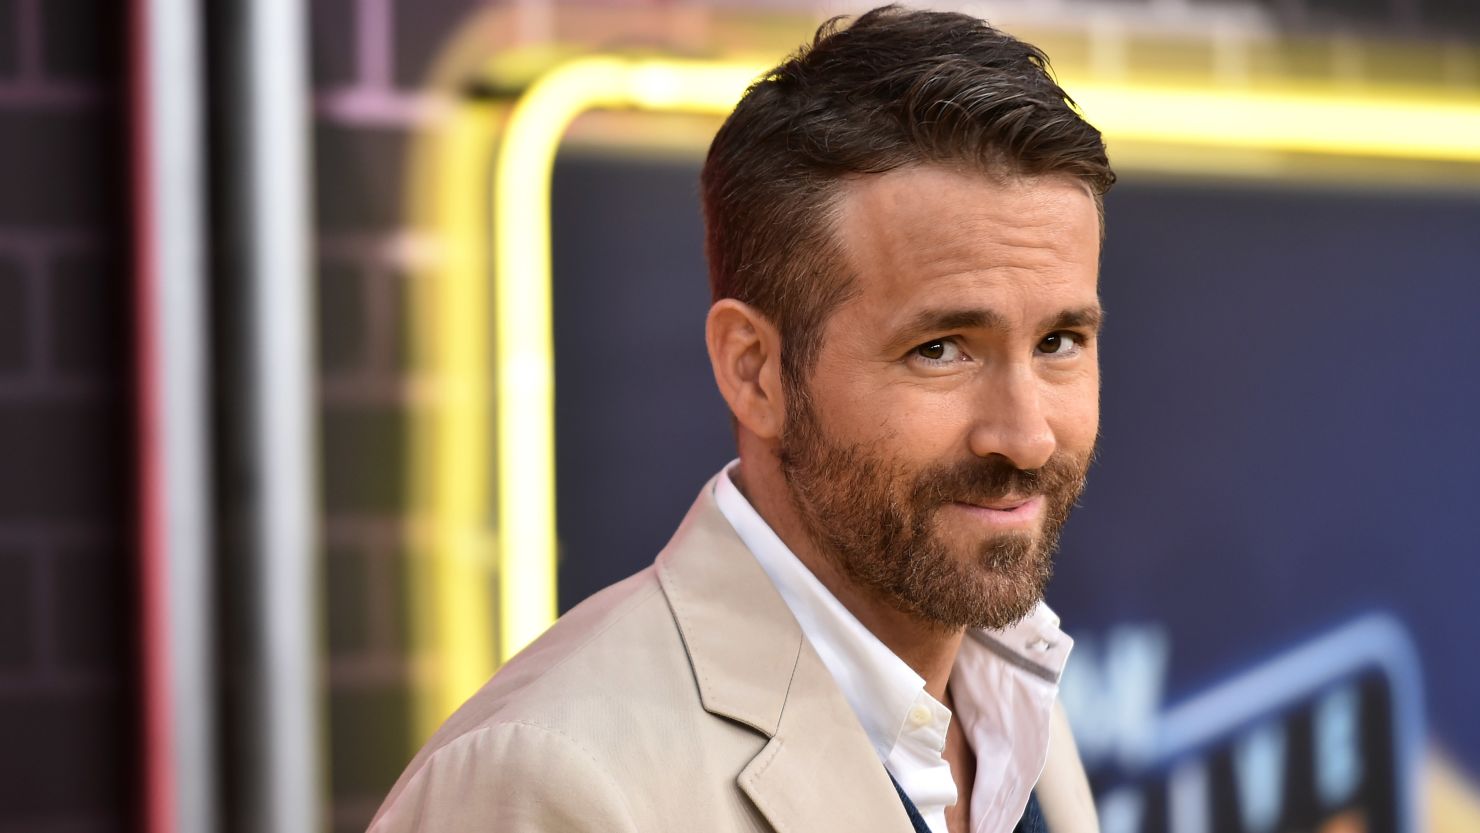 Actor Ryan Reynolds has acquired an ownership stake in a second company.